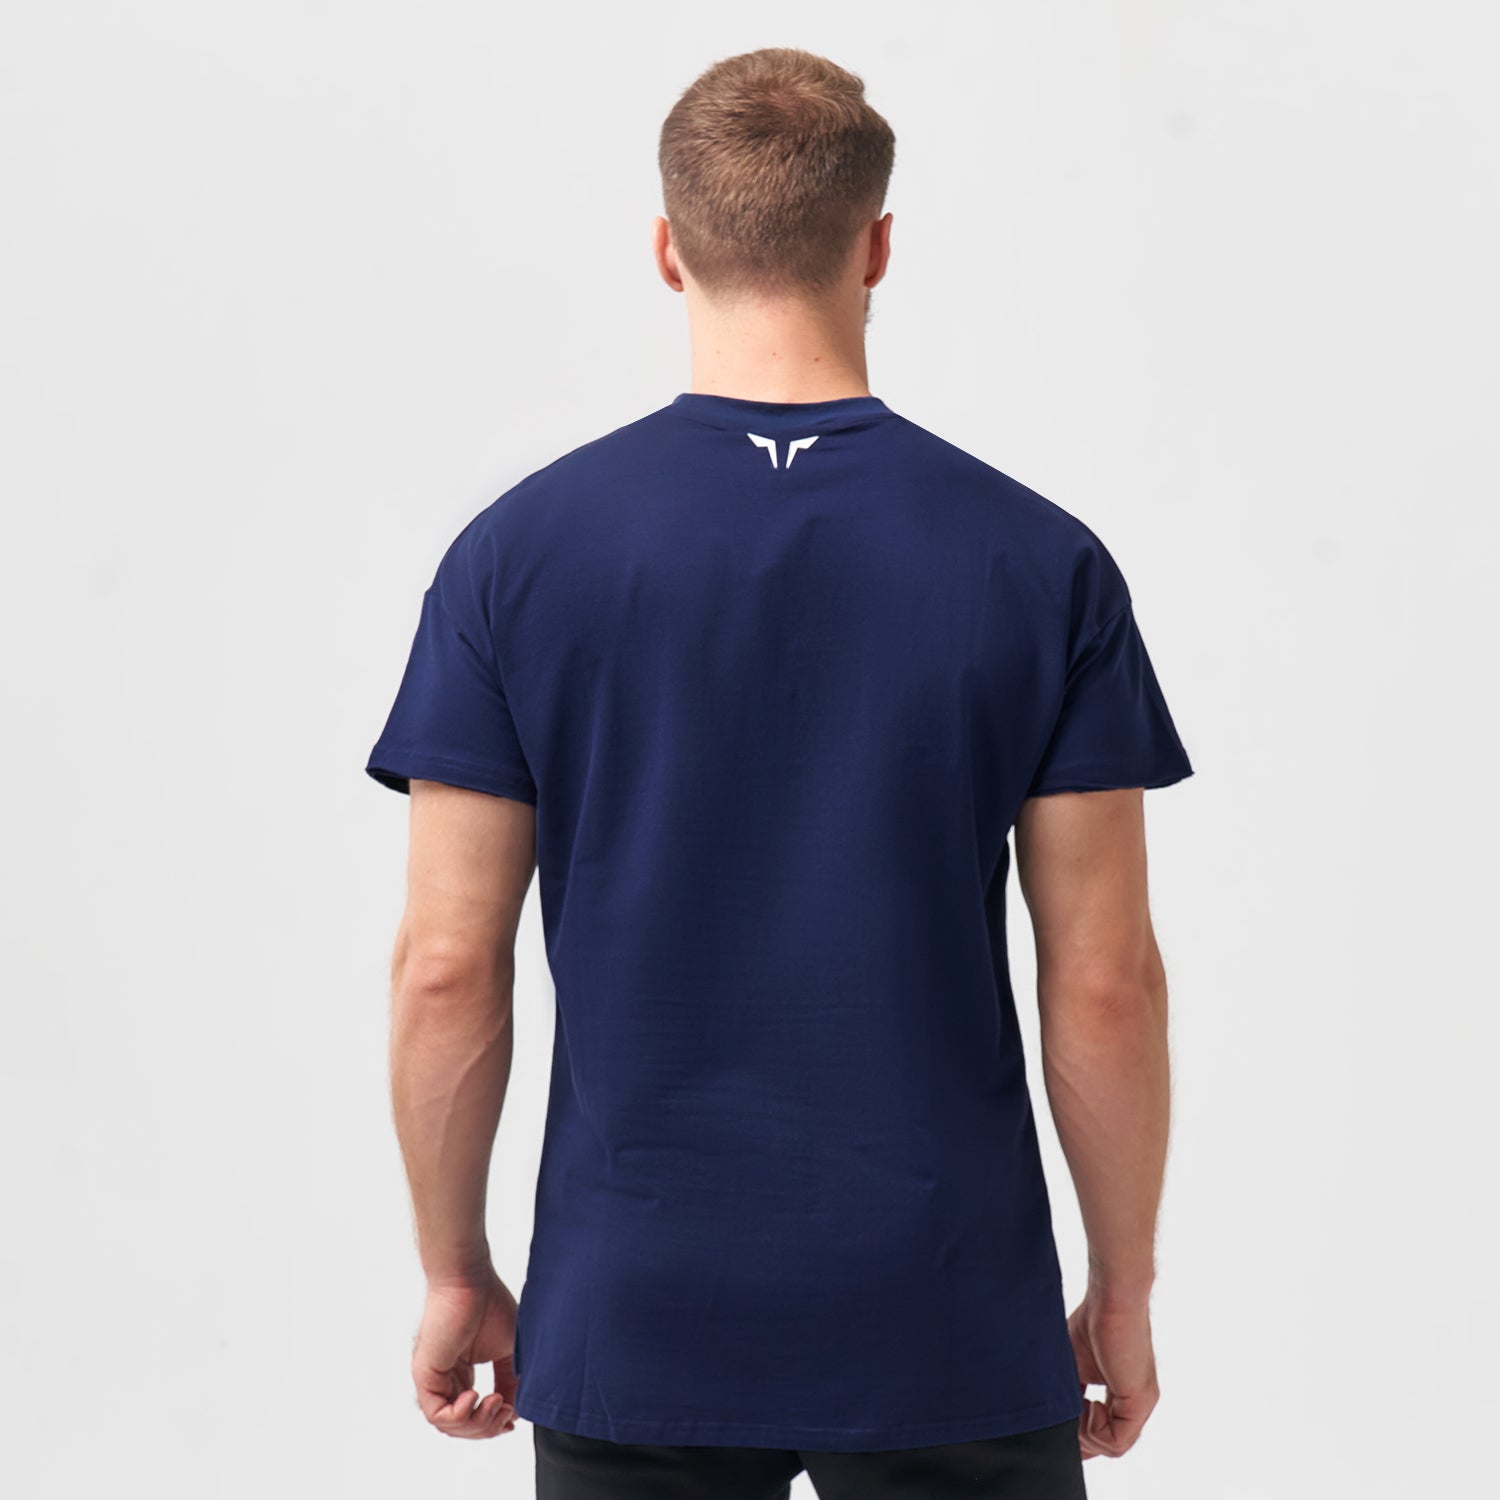 squatwolf-gym-wear-bodybuilding-tee-navy-workout-shirts-for-men